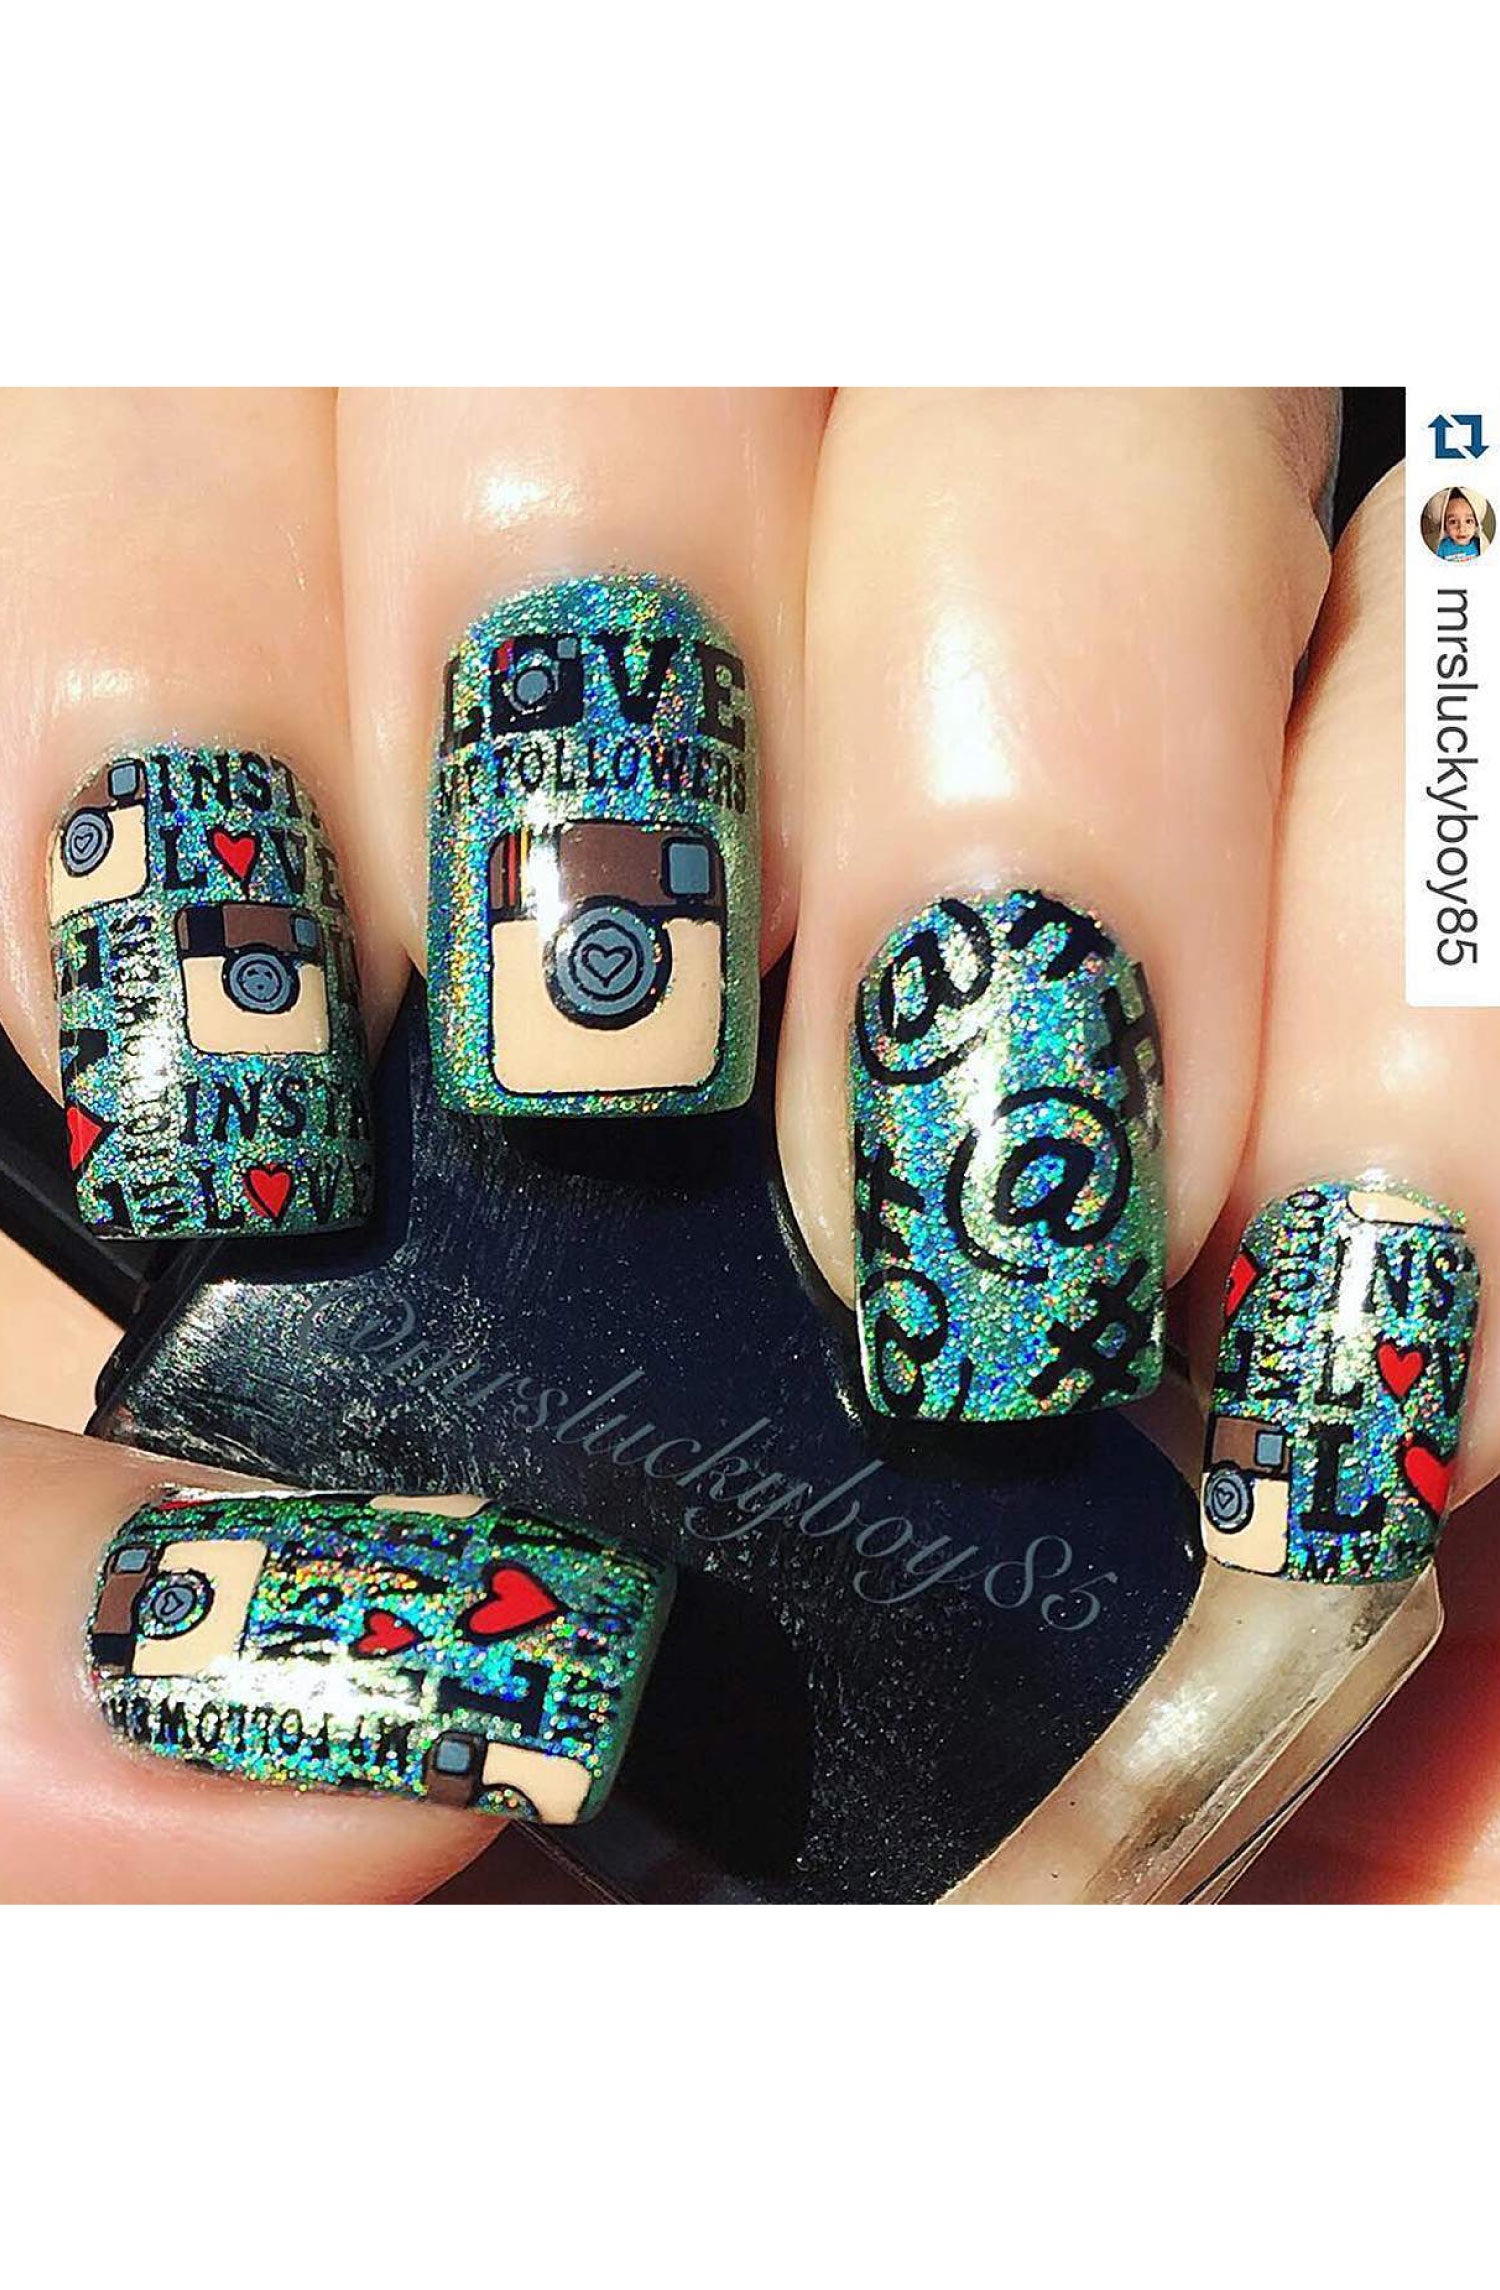 Cool Gaming Inspired Nail Art - Wow Gallery